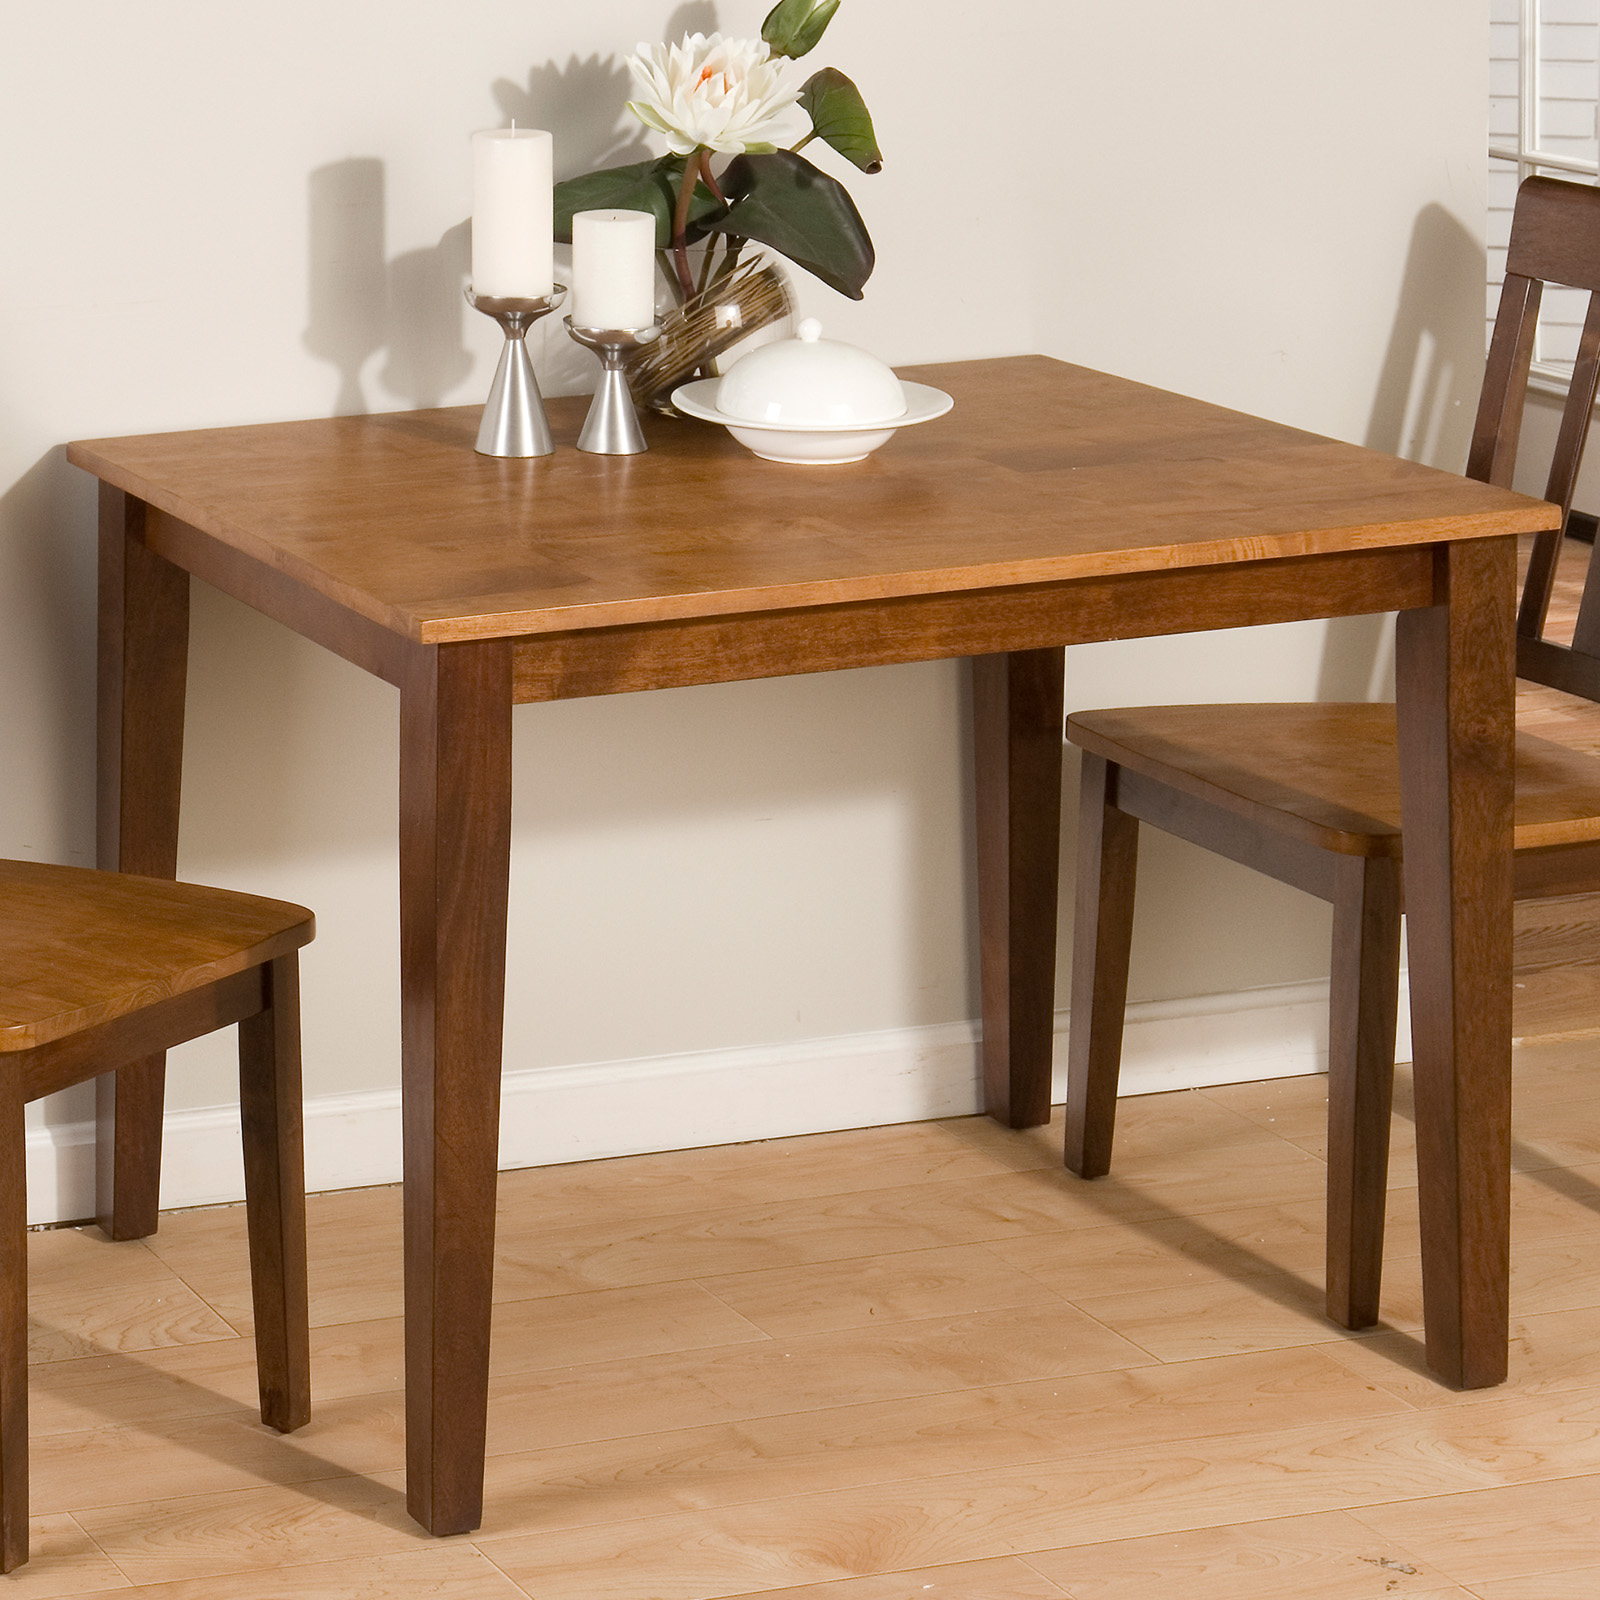 For an extra small dining area, remove most of the chairs and place an uncomplicated arrangement on the table.